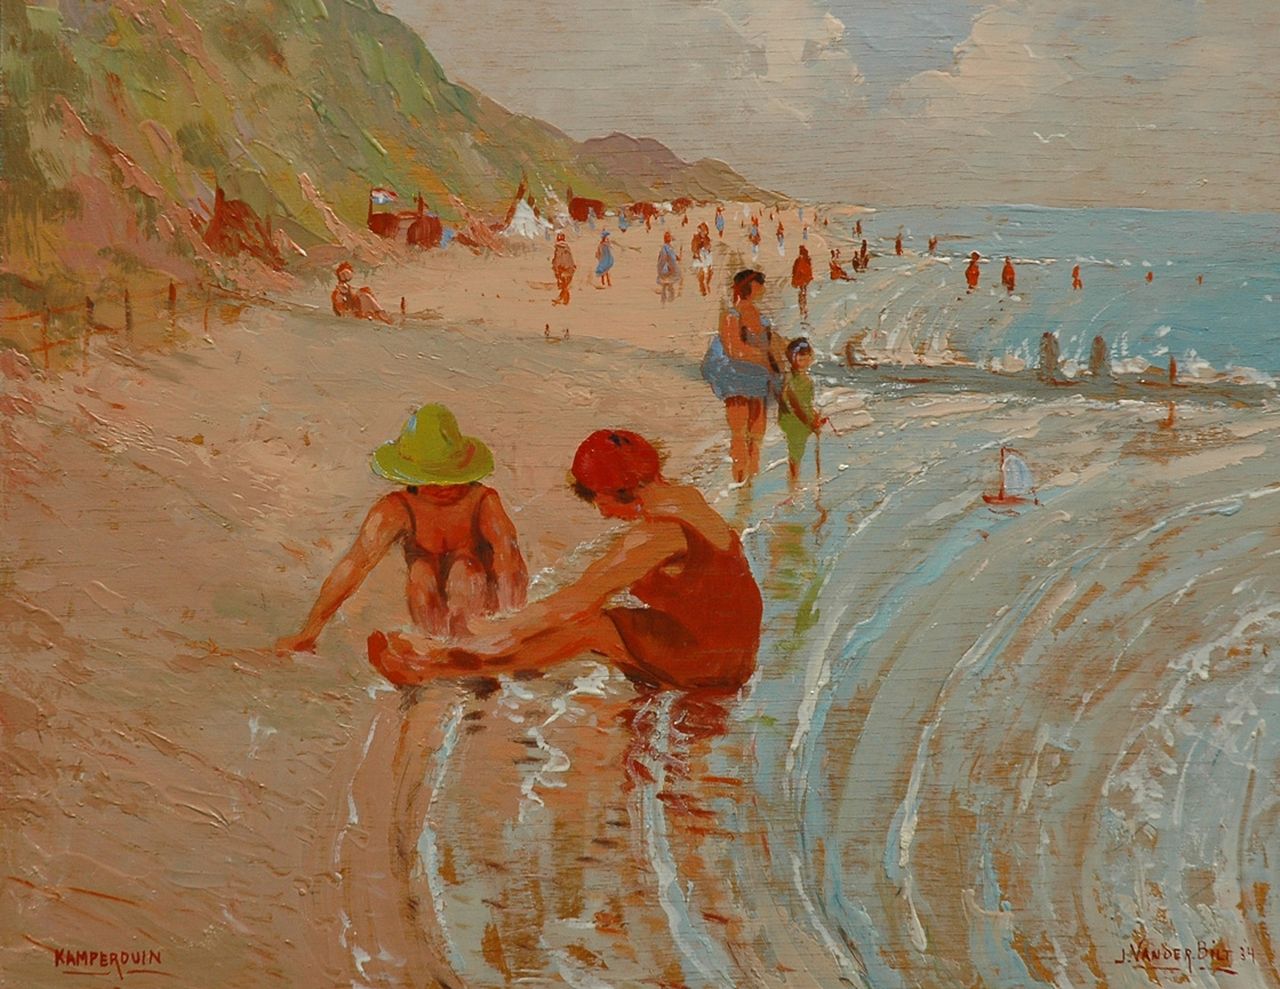 Johan van der Bilt | Children playing on the beach of Kamperduin, oil on panel, 34.7 x 45.0 cm, signed l.r. and dated '34